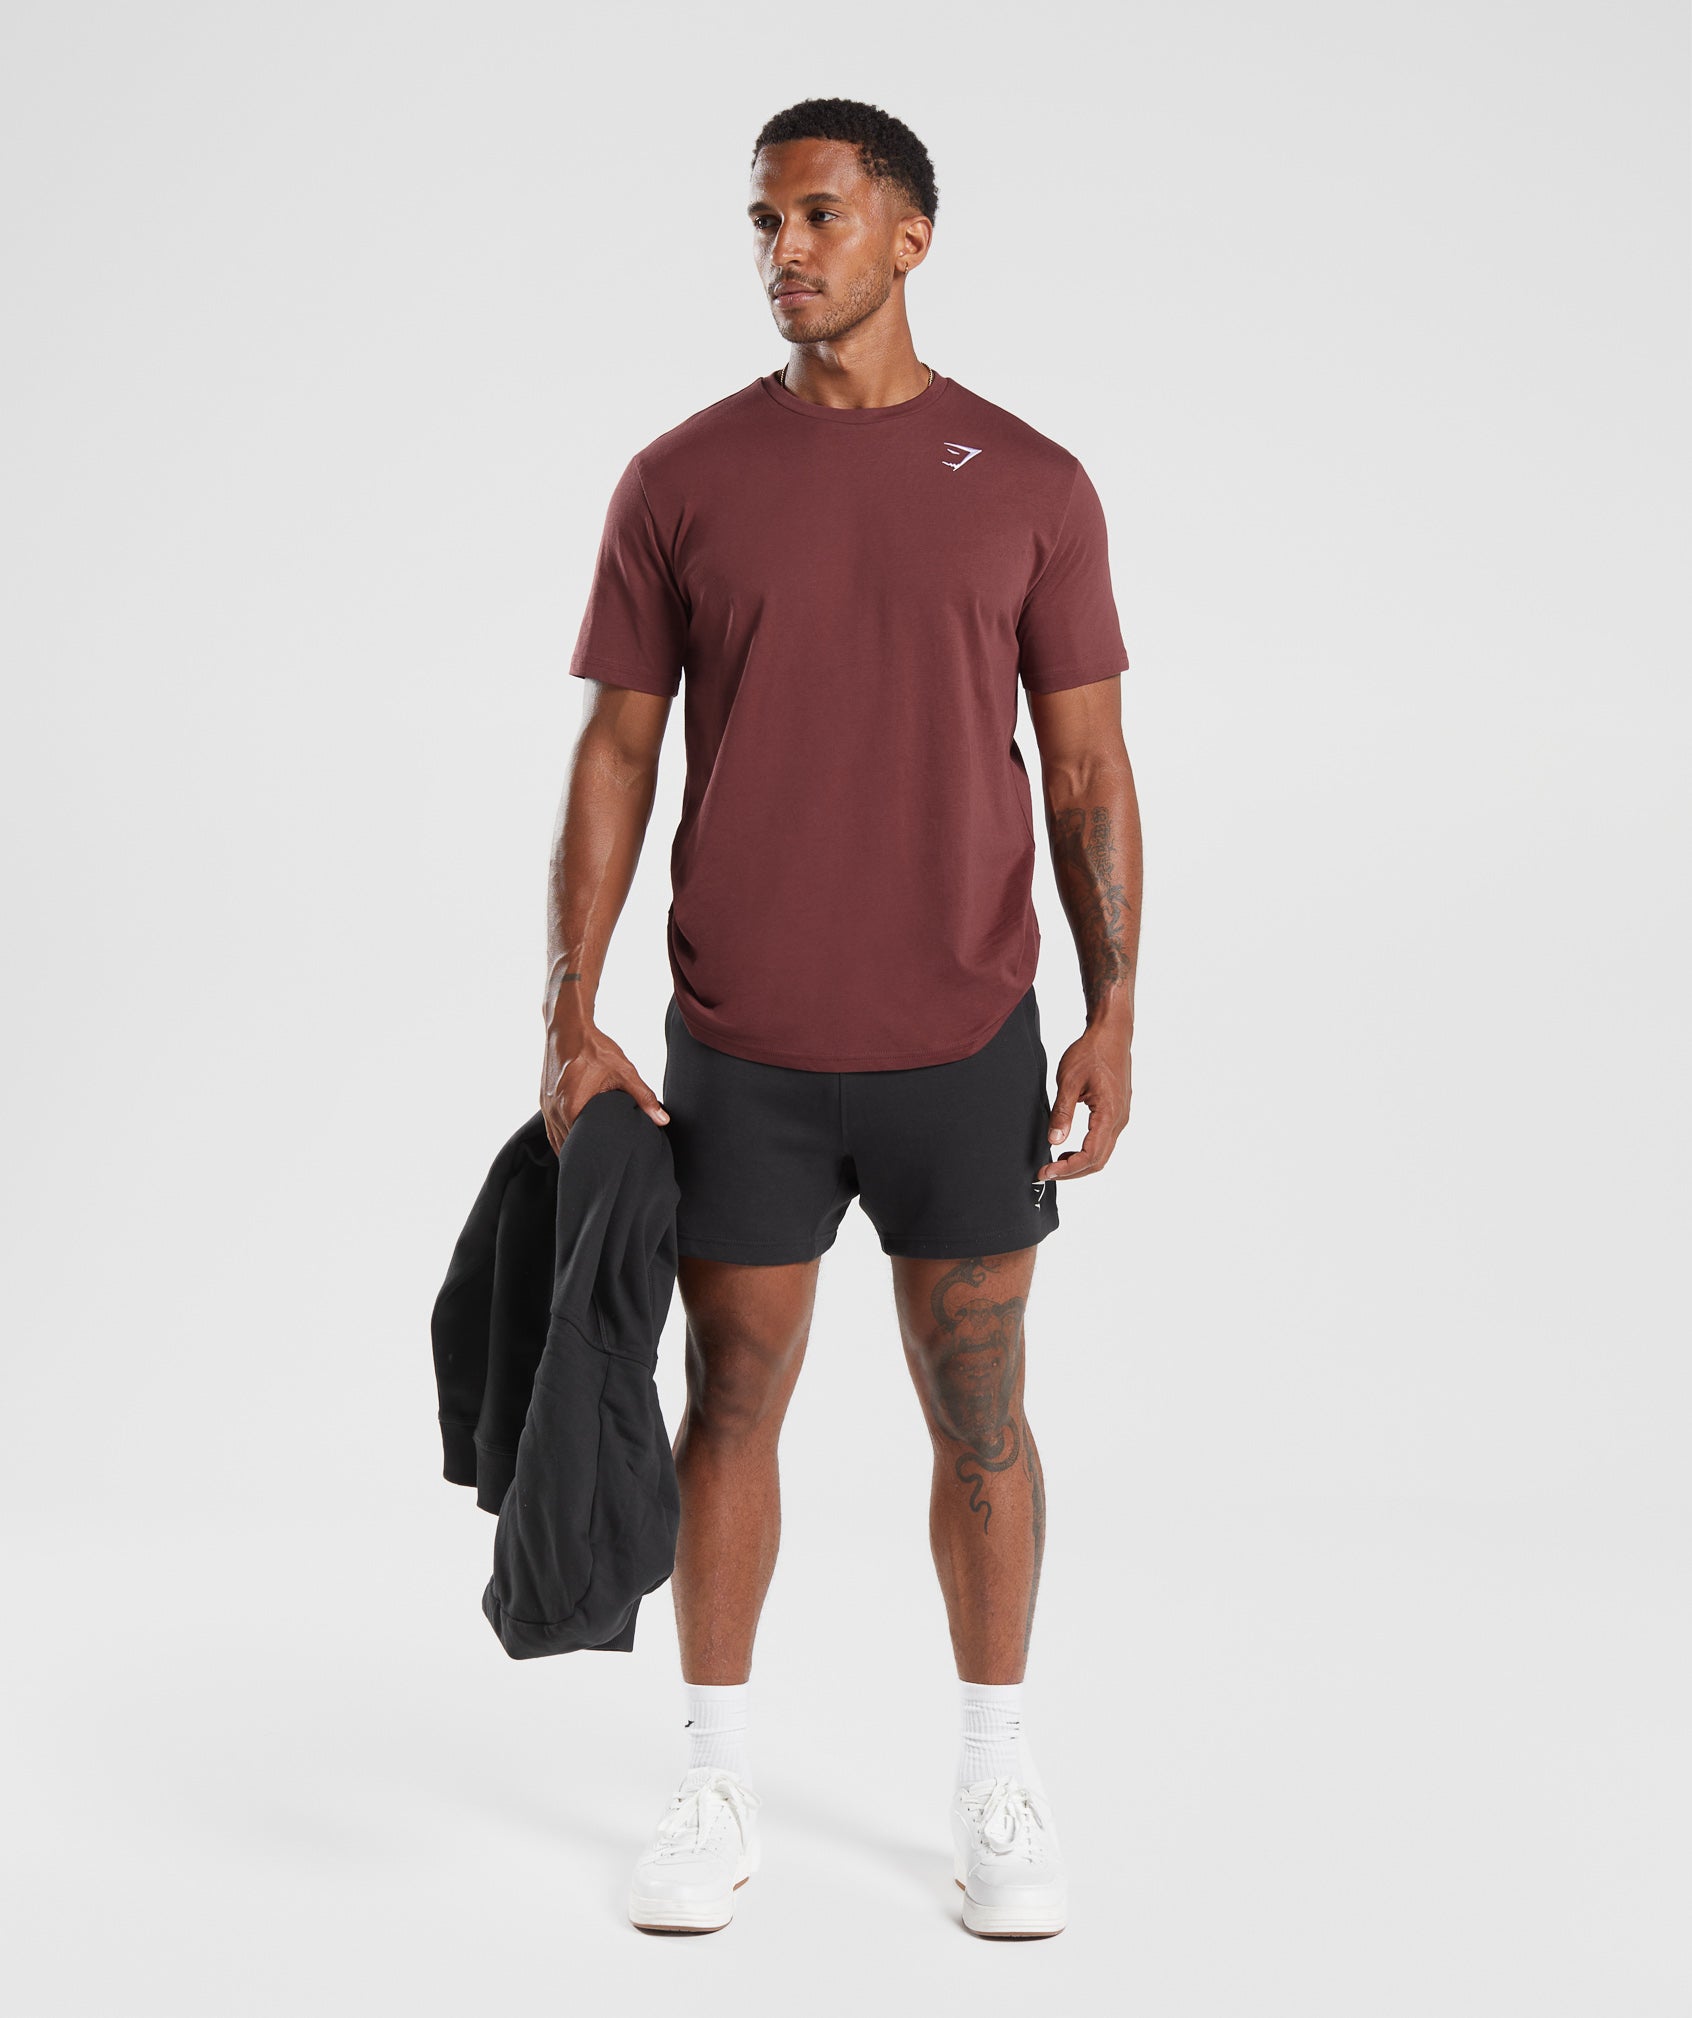 Crest T-Shirt in Washed Burgundy - view 4